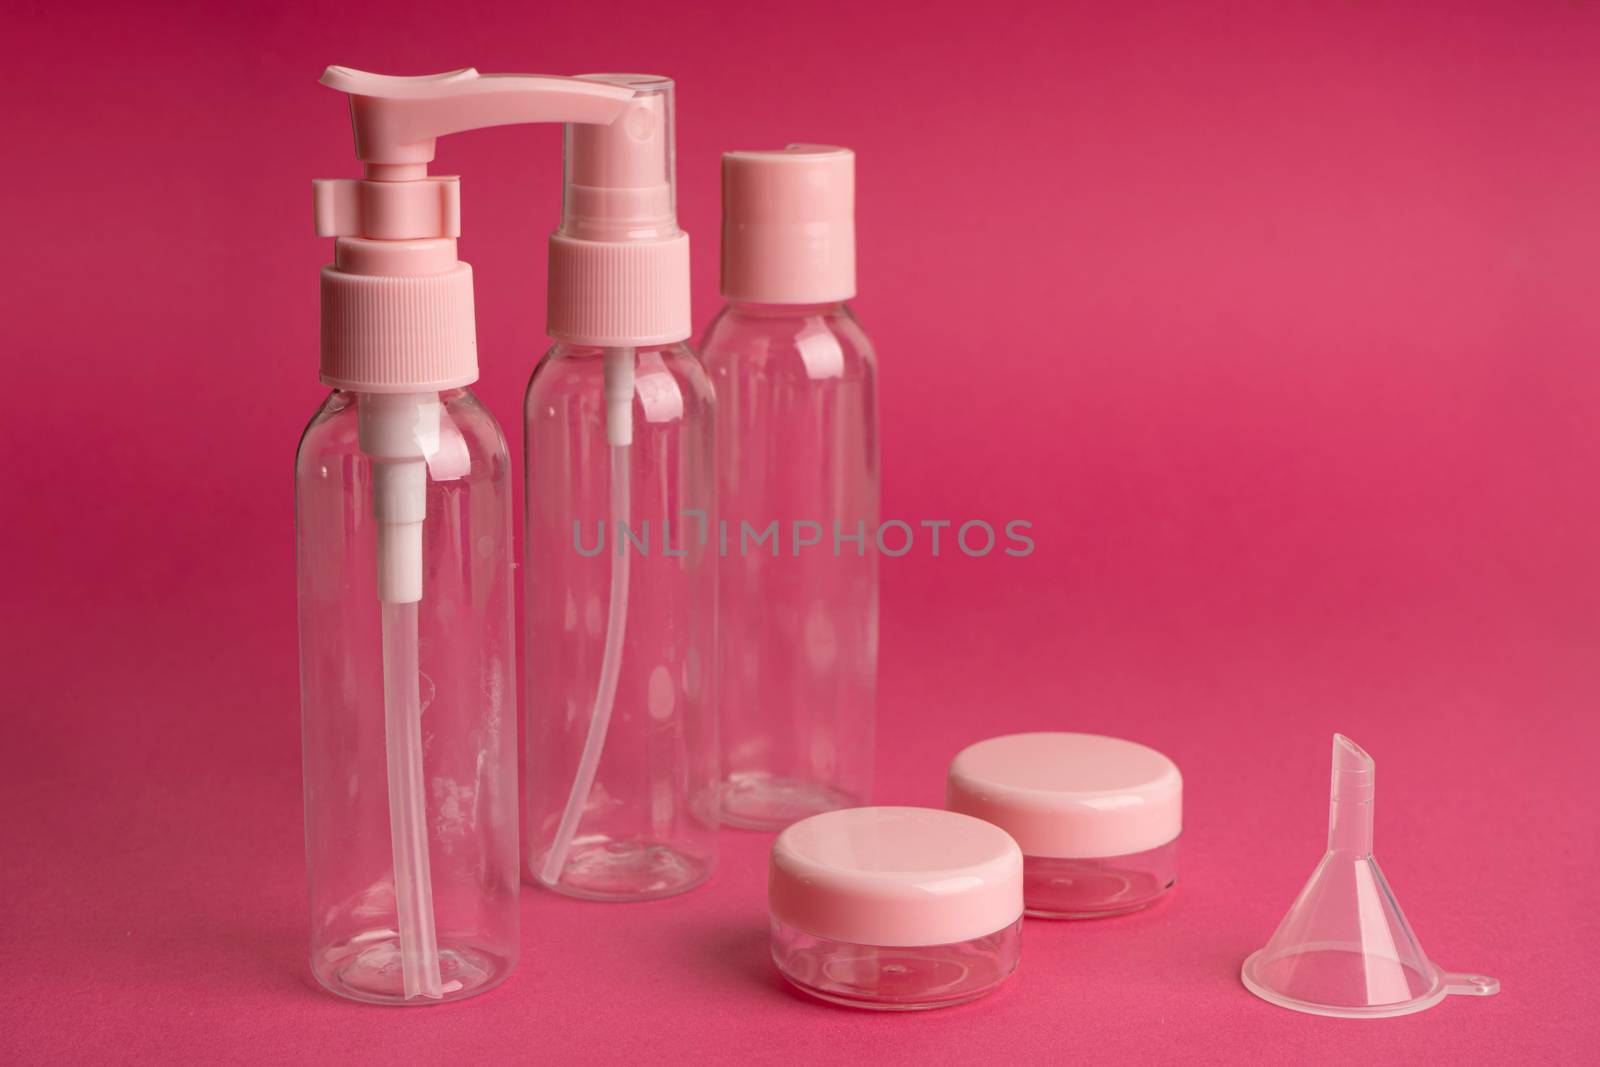 A kit of plastic containers for transportation of shampoos, creams and cosmetics in travel.